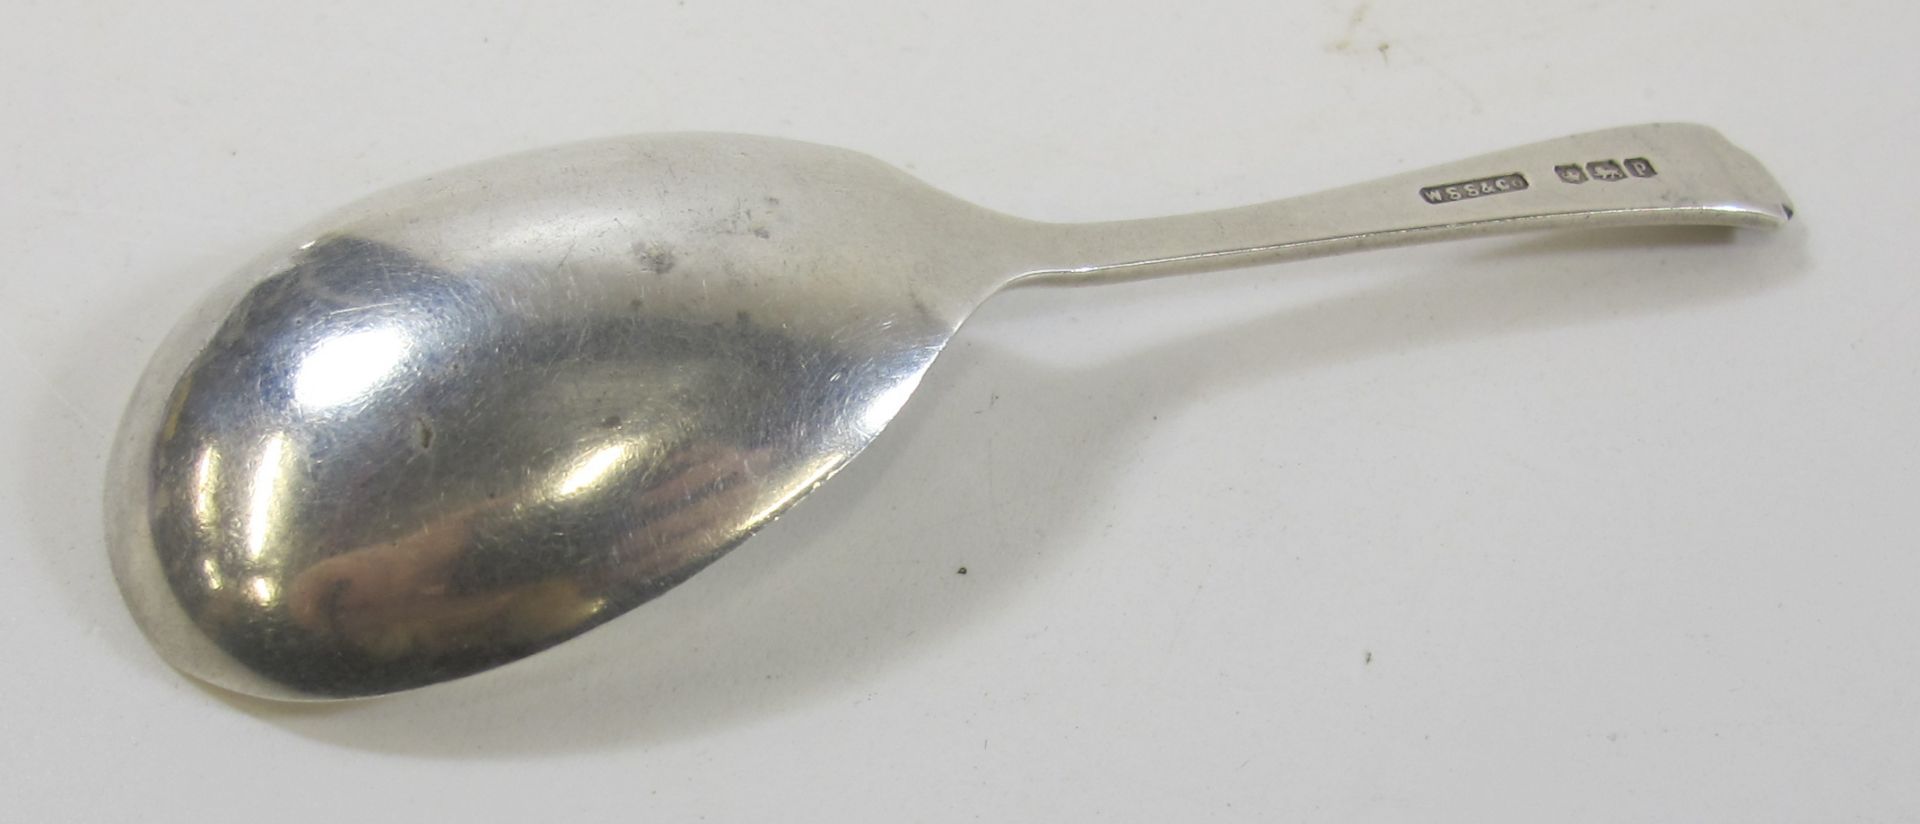 Art Deco Silver Caddy Spoon (Sheffield 1932) and 'Siam Sterling' Marked Menu Holder (est £25-£50) - Image 5 of 5